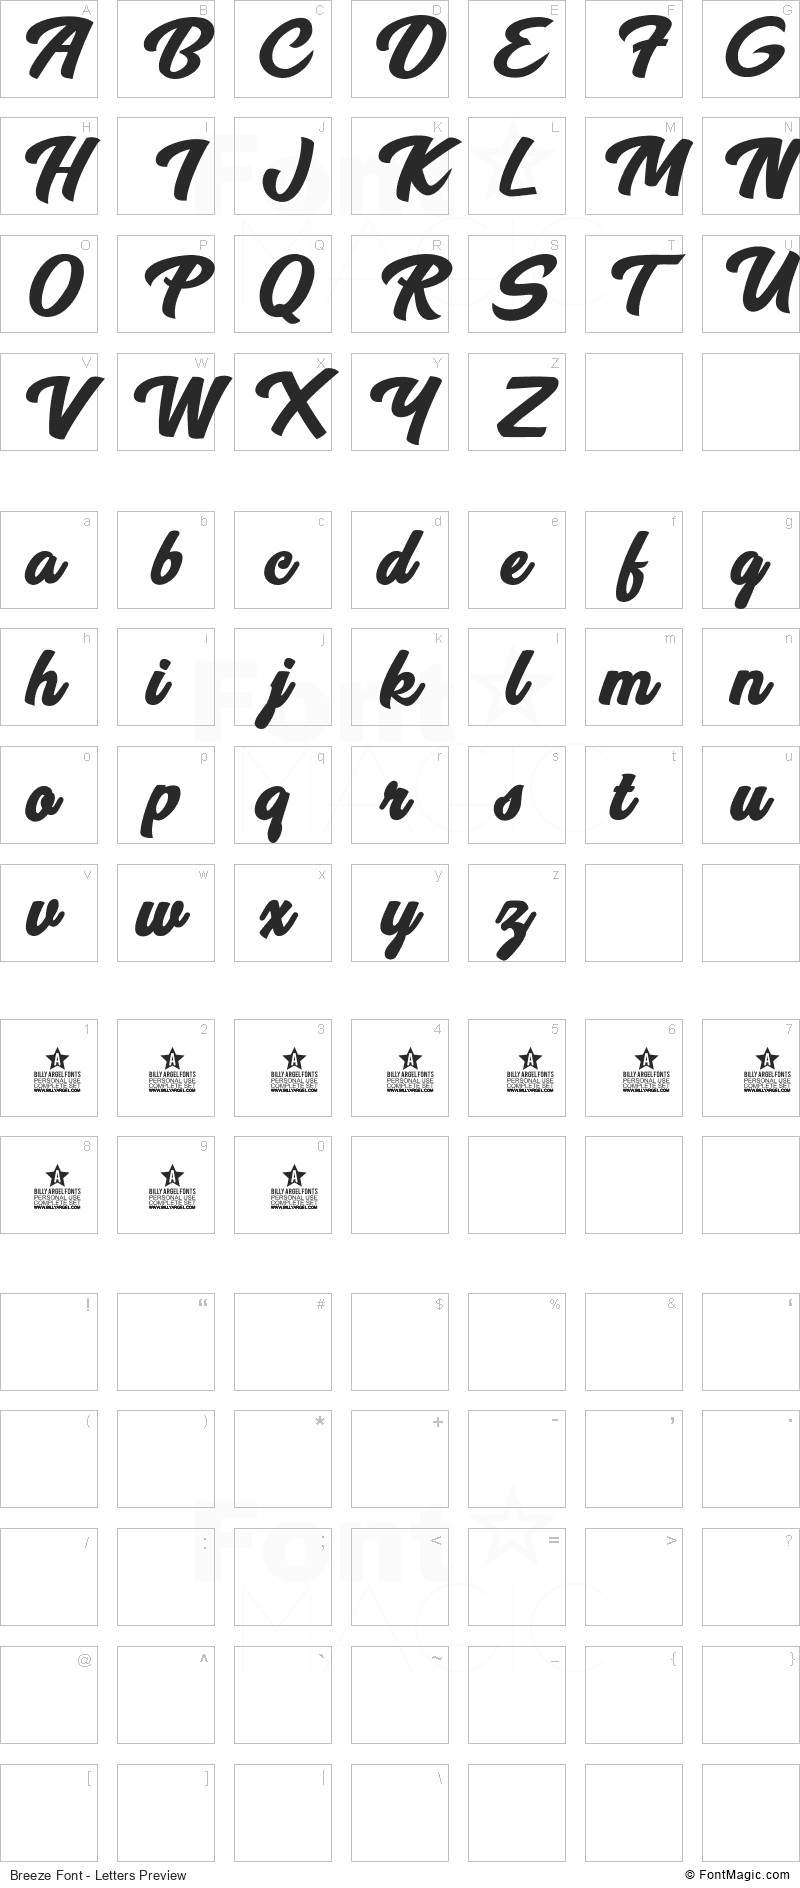 Breeze Font - All Latters Preview Chart